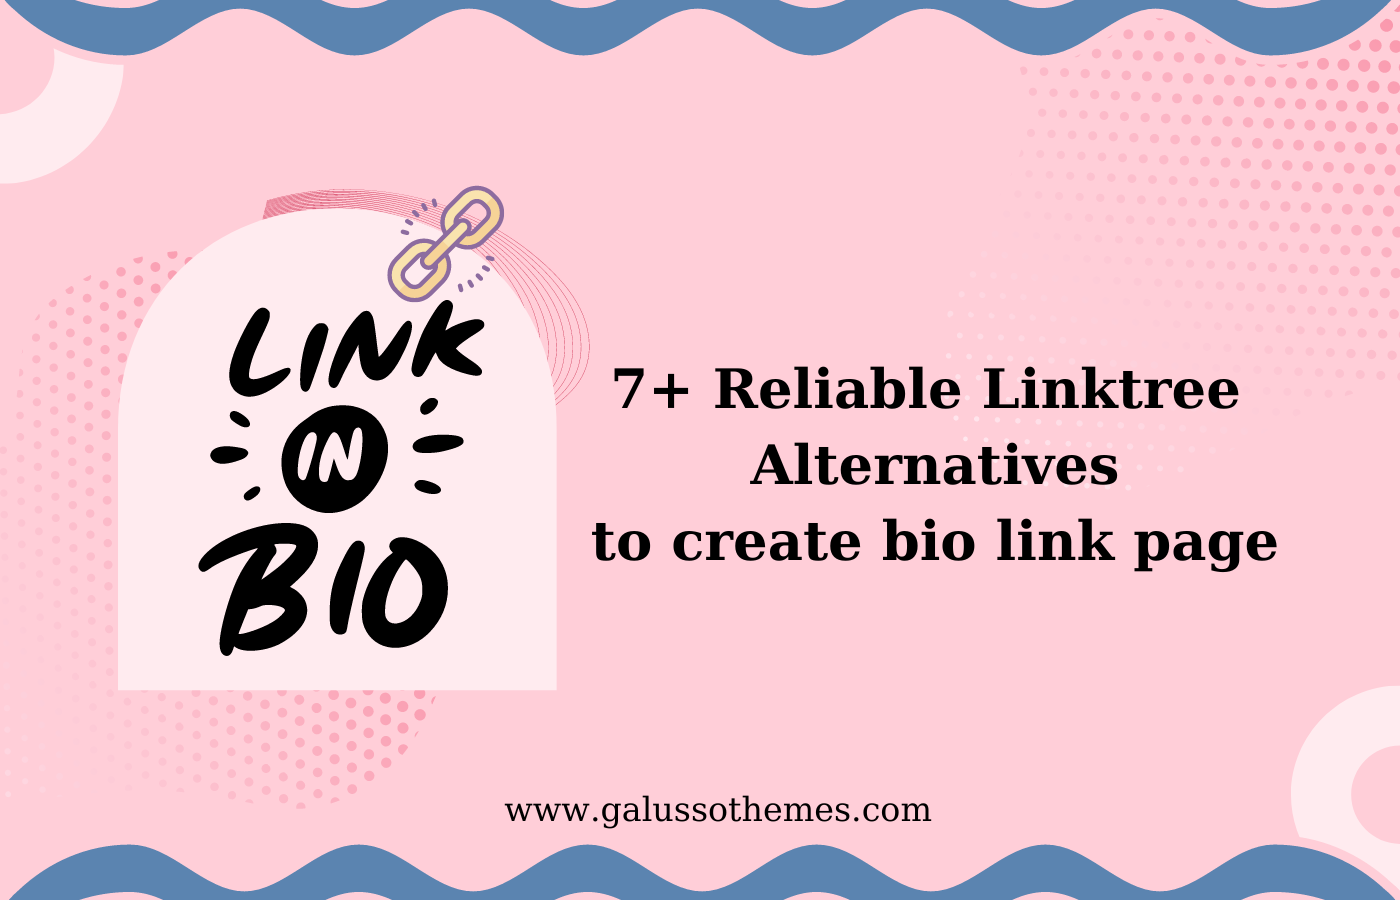 Explore Linktree alternatives for your business